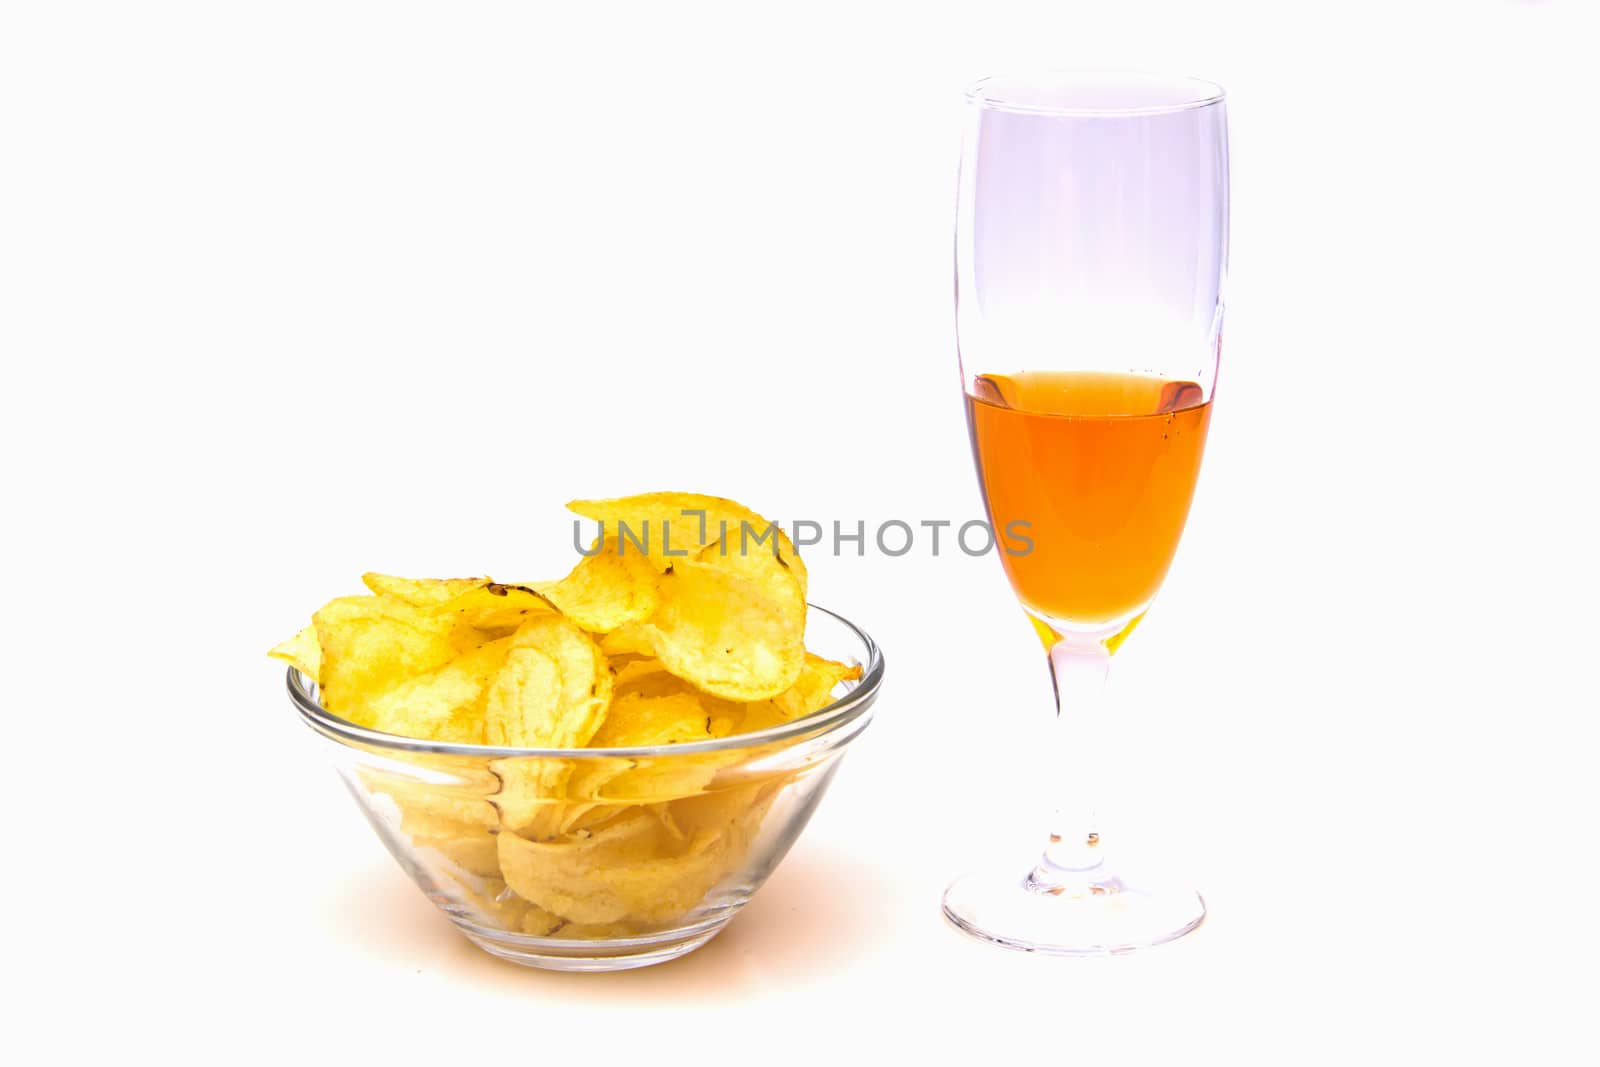 Cocktails on a white background seen from the front